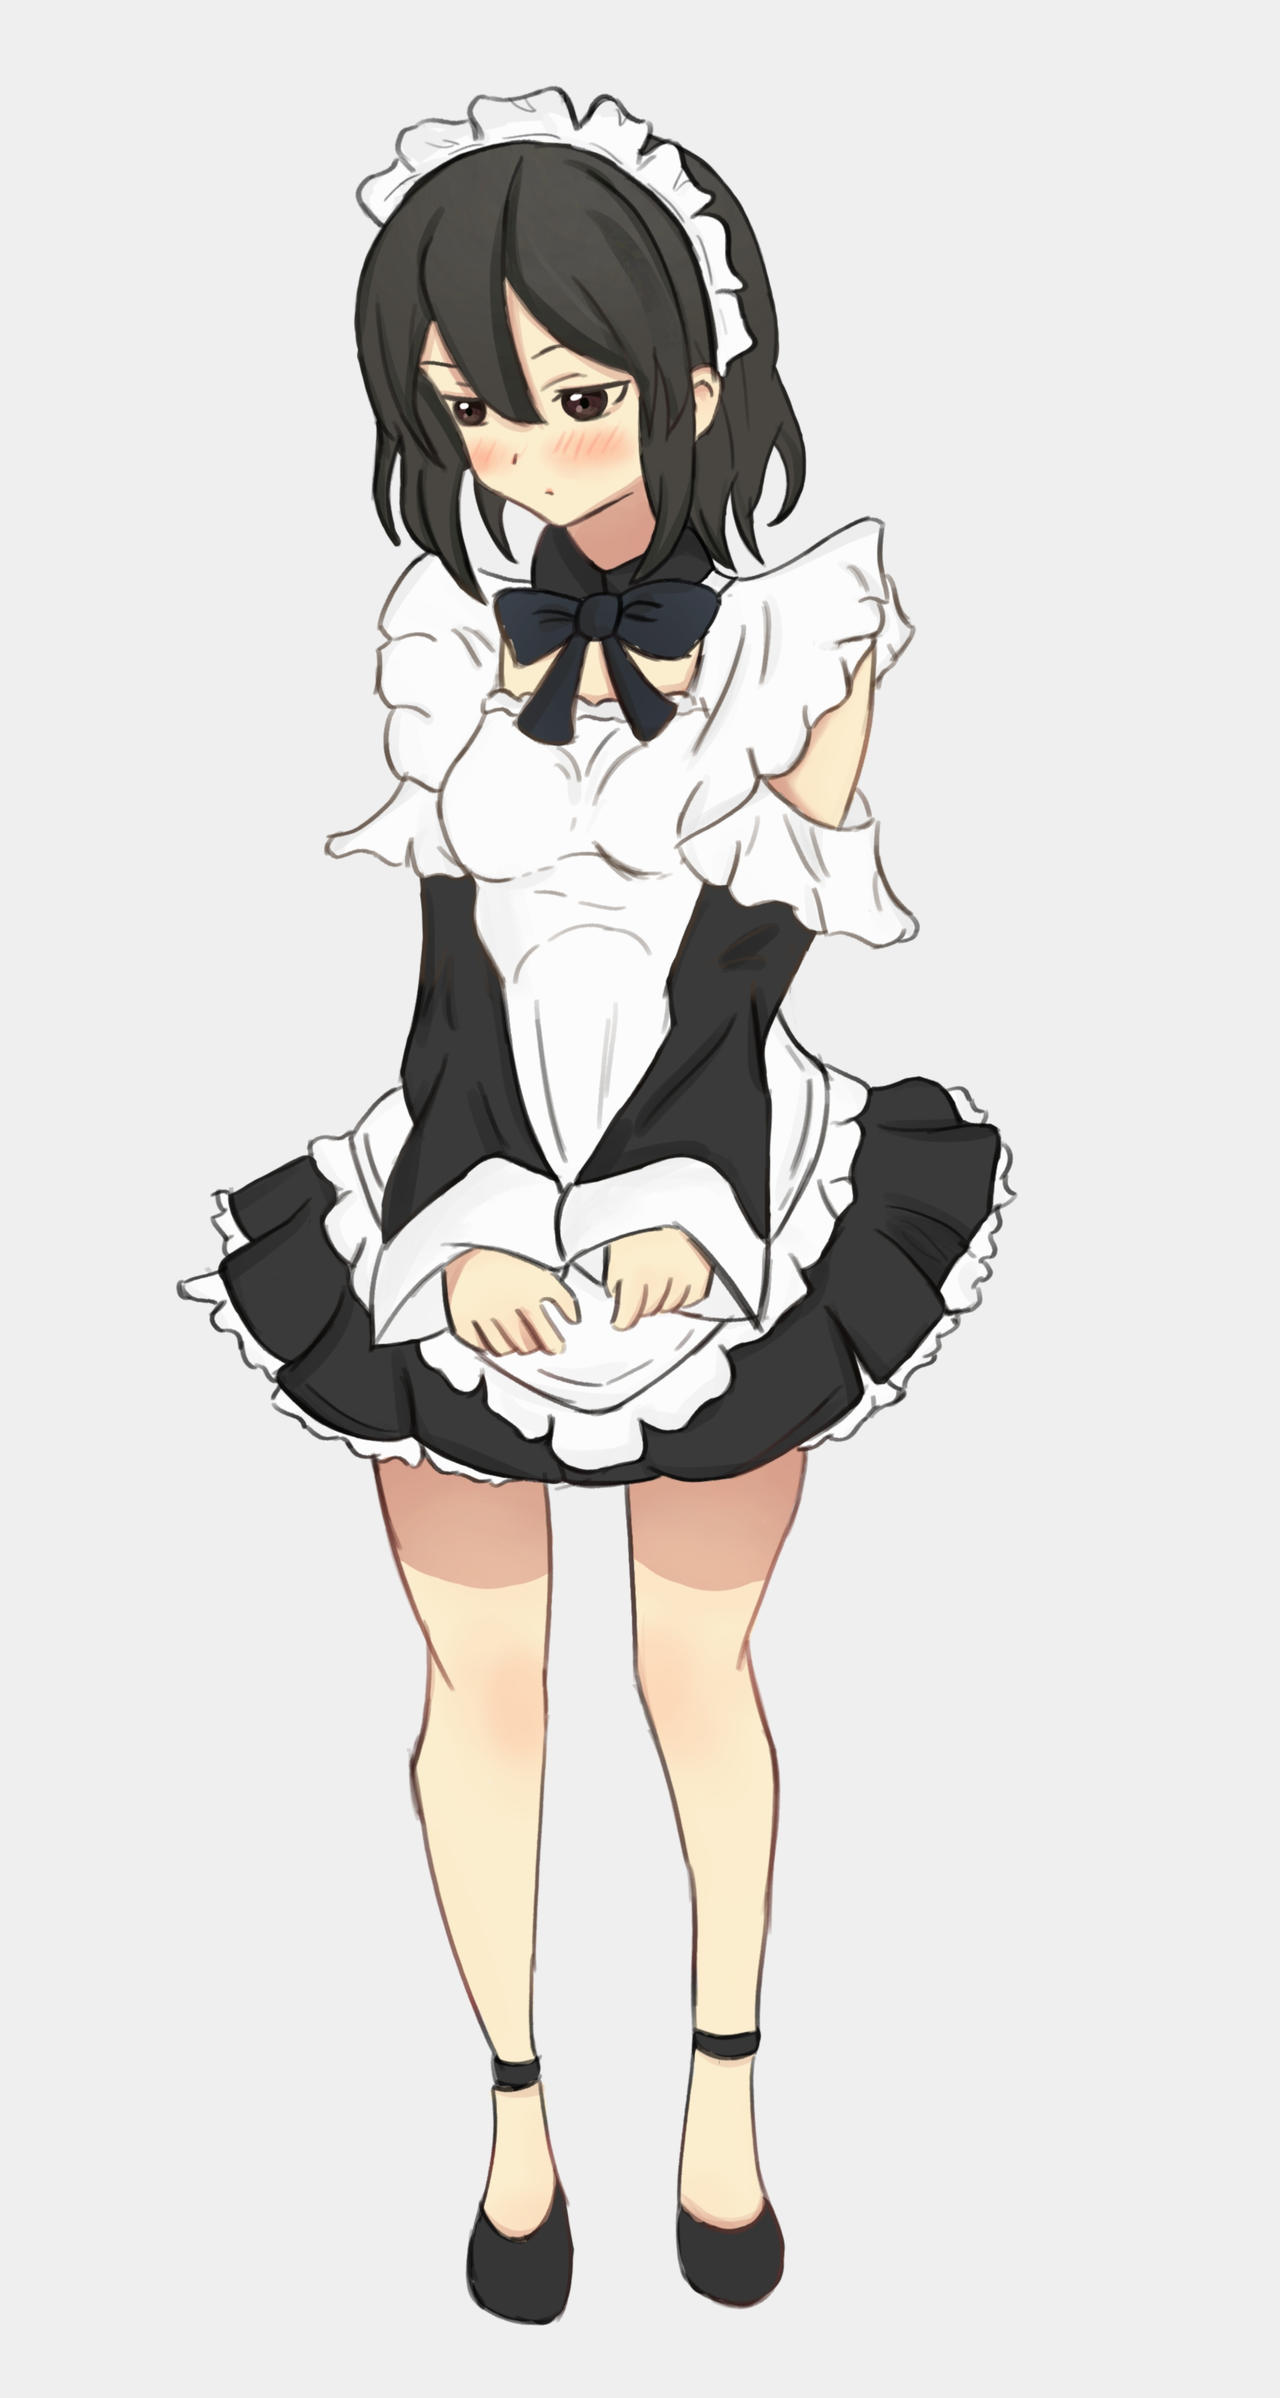 Inaba in maid outfit by VineetArto on DeviantArt